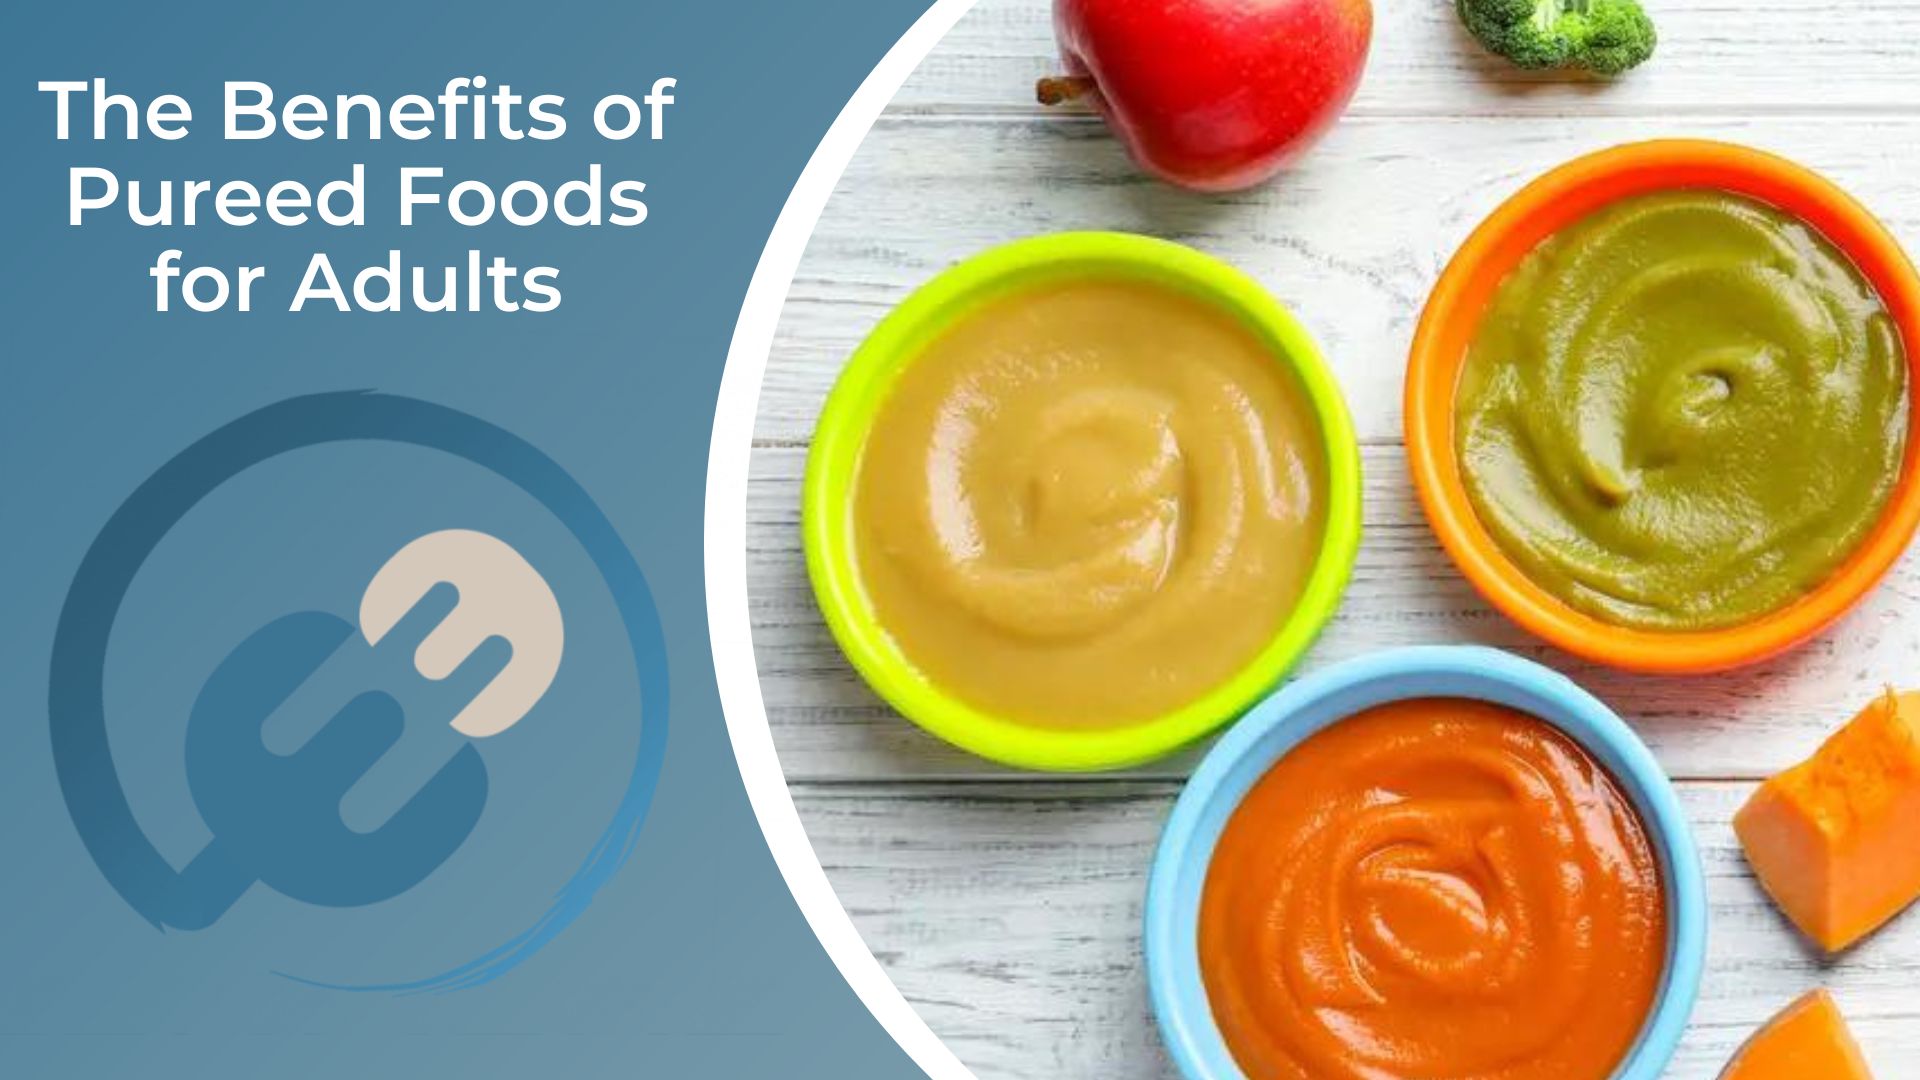 The Benefits of Pureed Foods for Adults